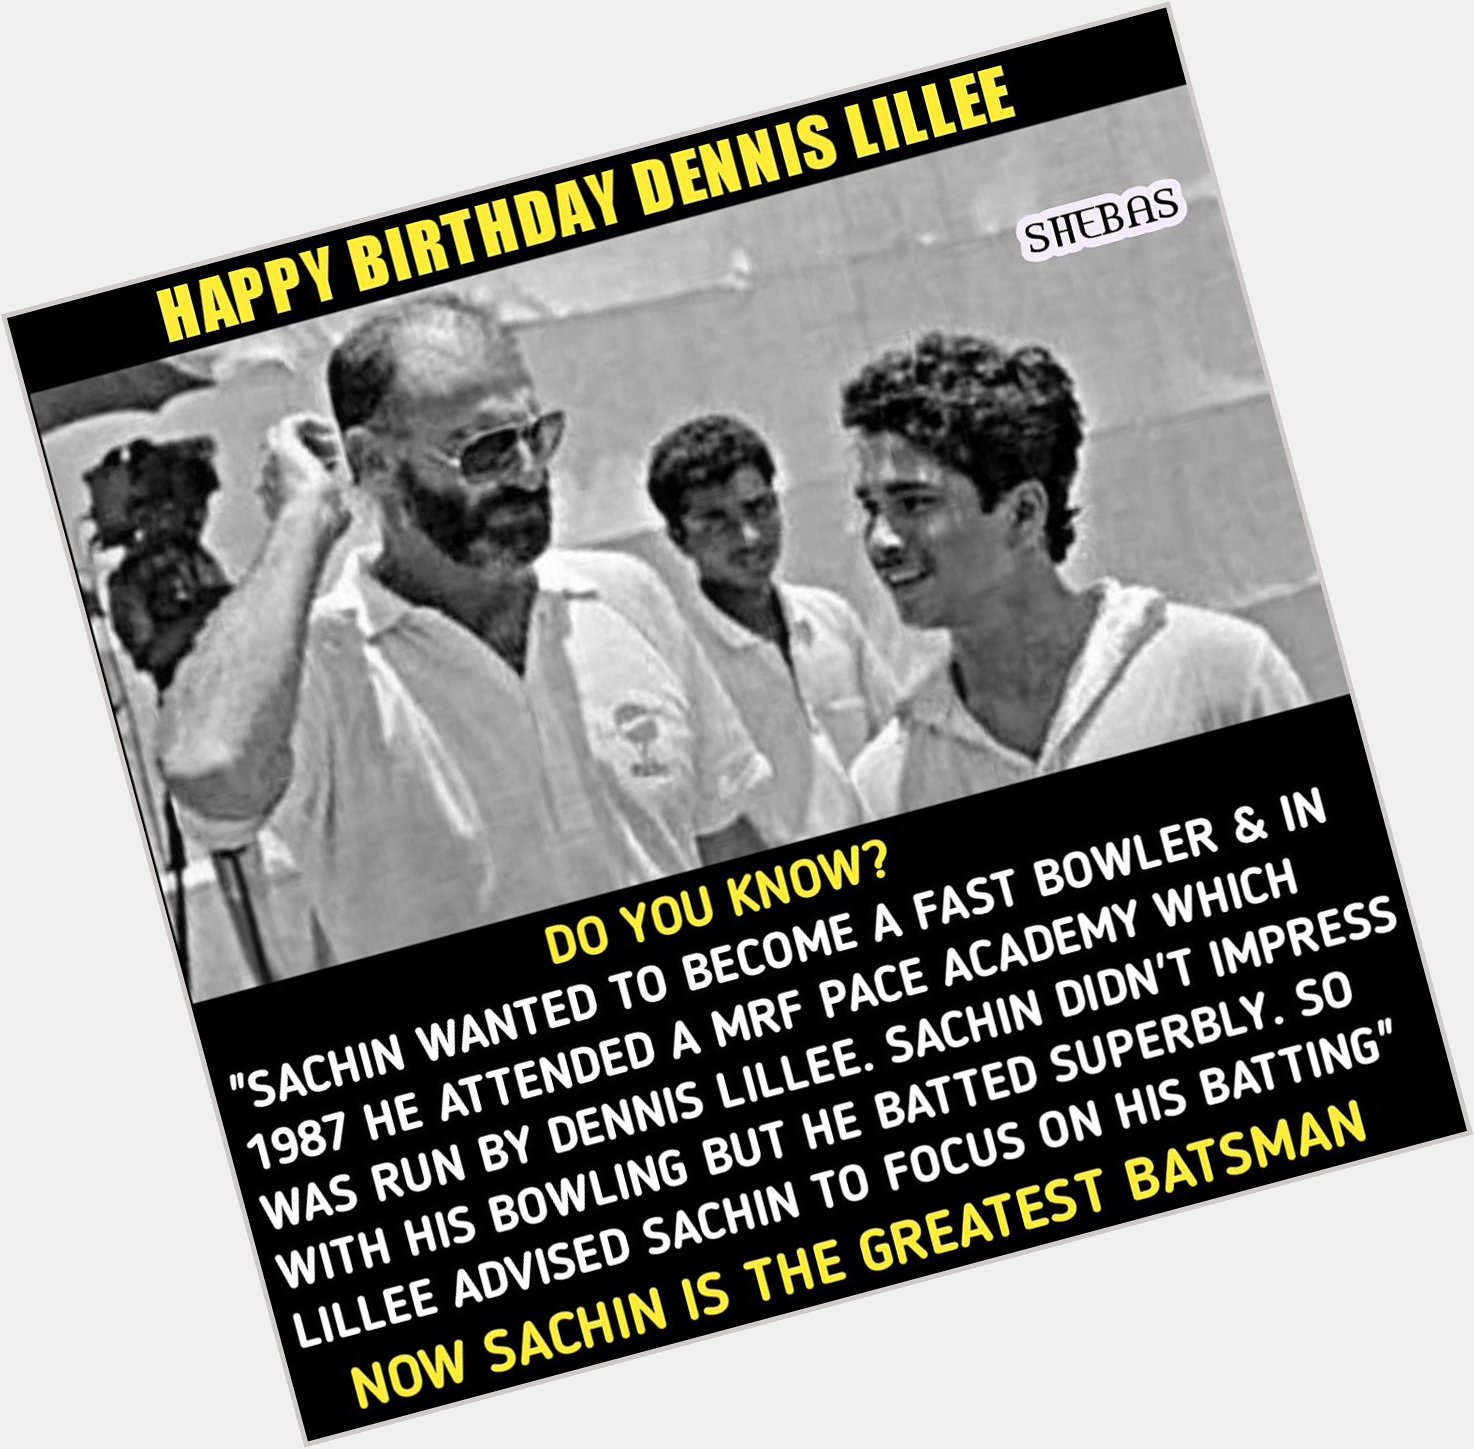 Happy Birthday One Time, Dennis Lillee Used Aluminium Bat in a Test match 